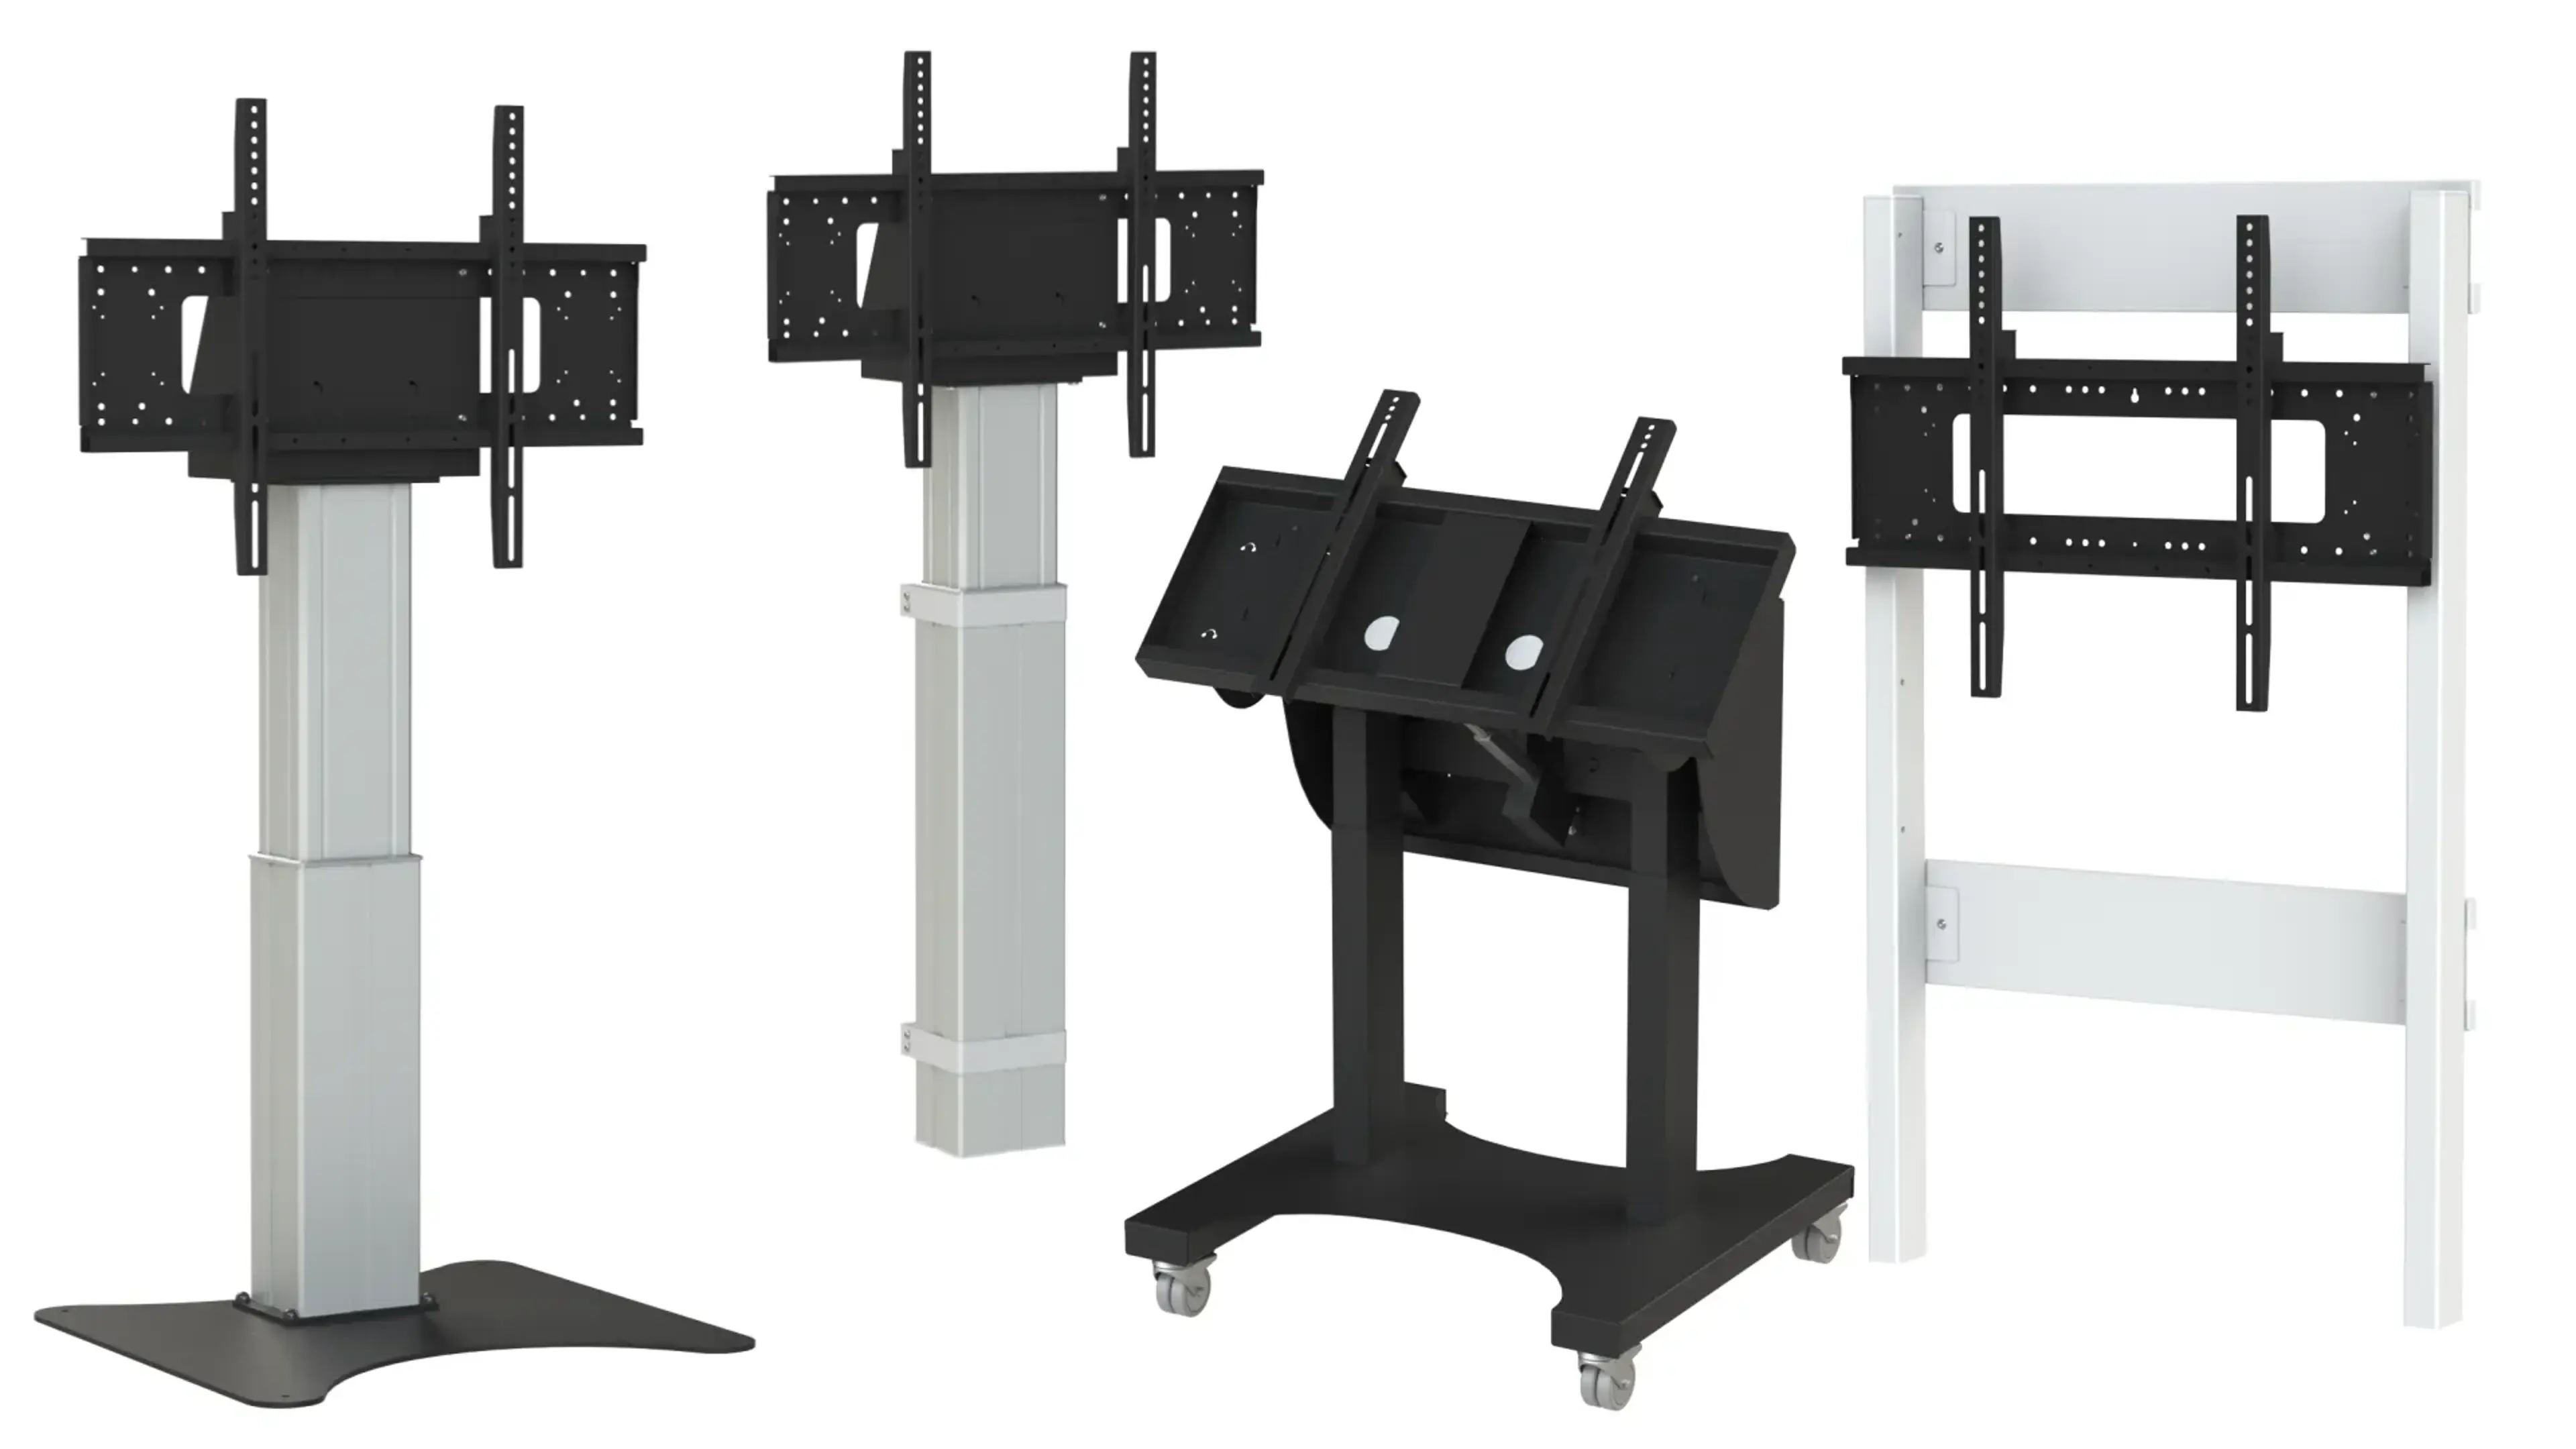 Examples of various TV mounts with motorised lift capabilities